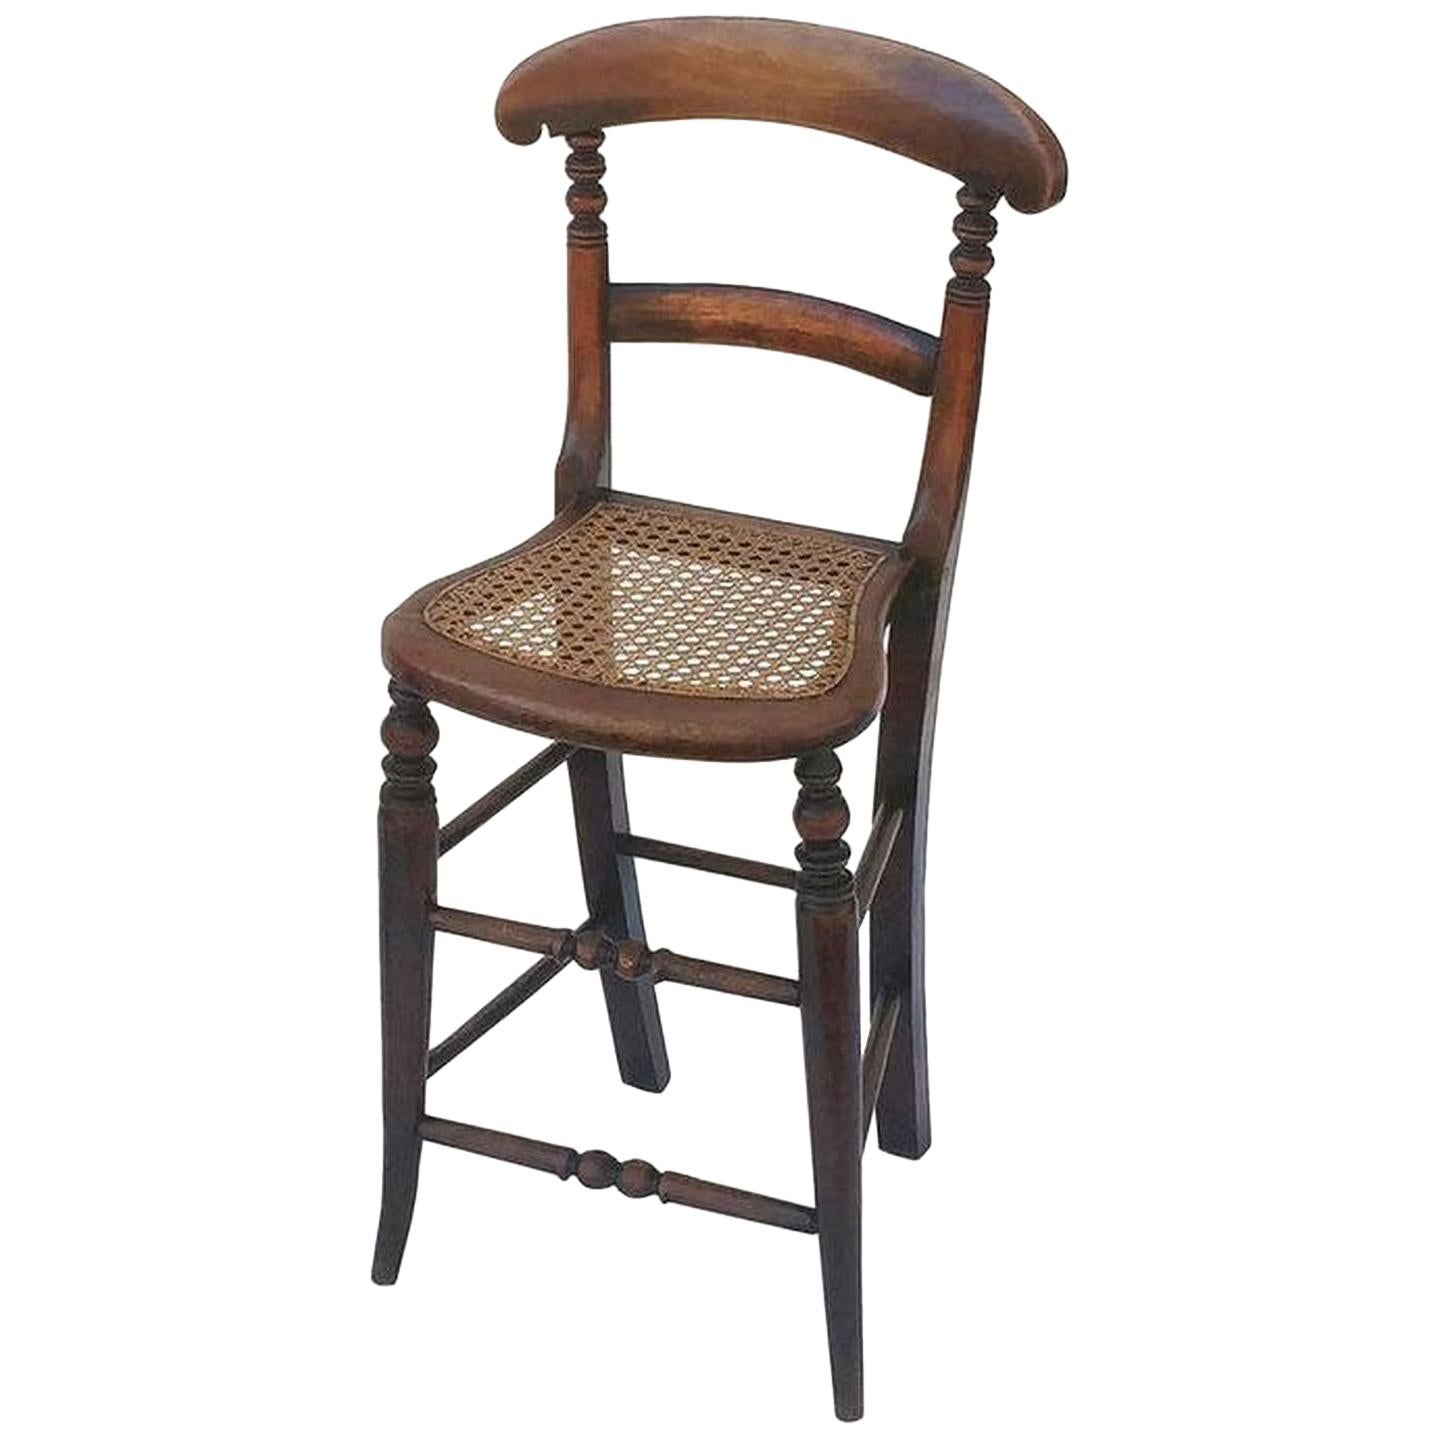 English Child's Correction Chair from the Georgian Era